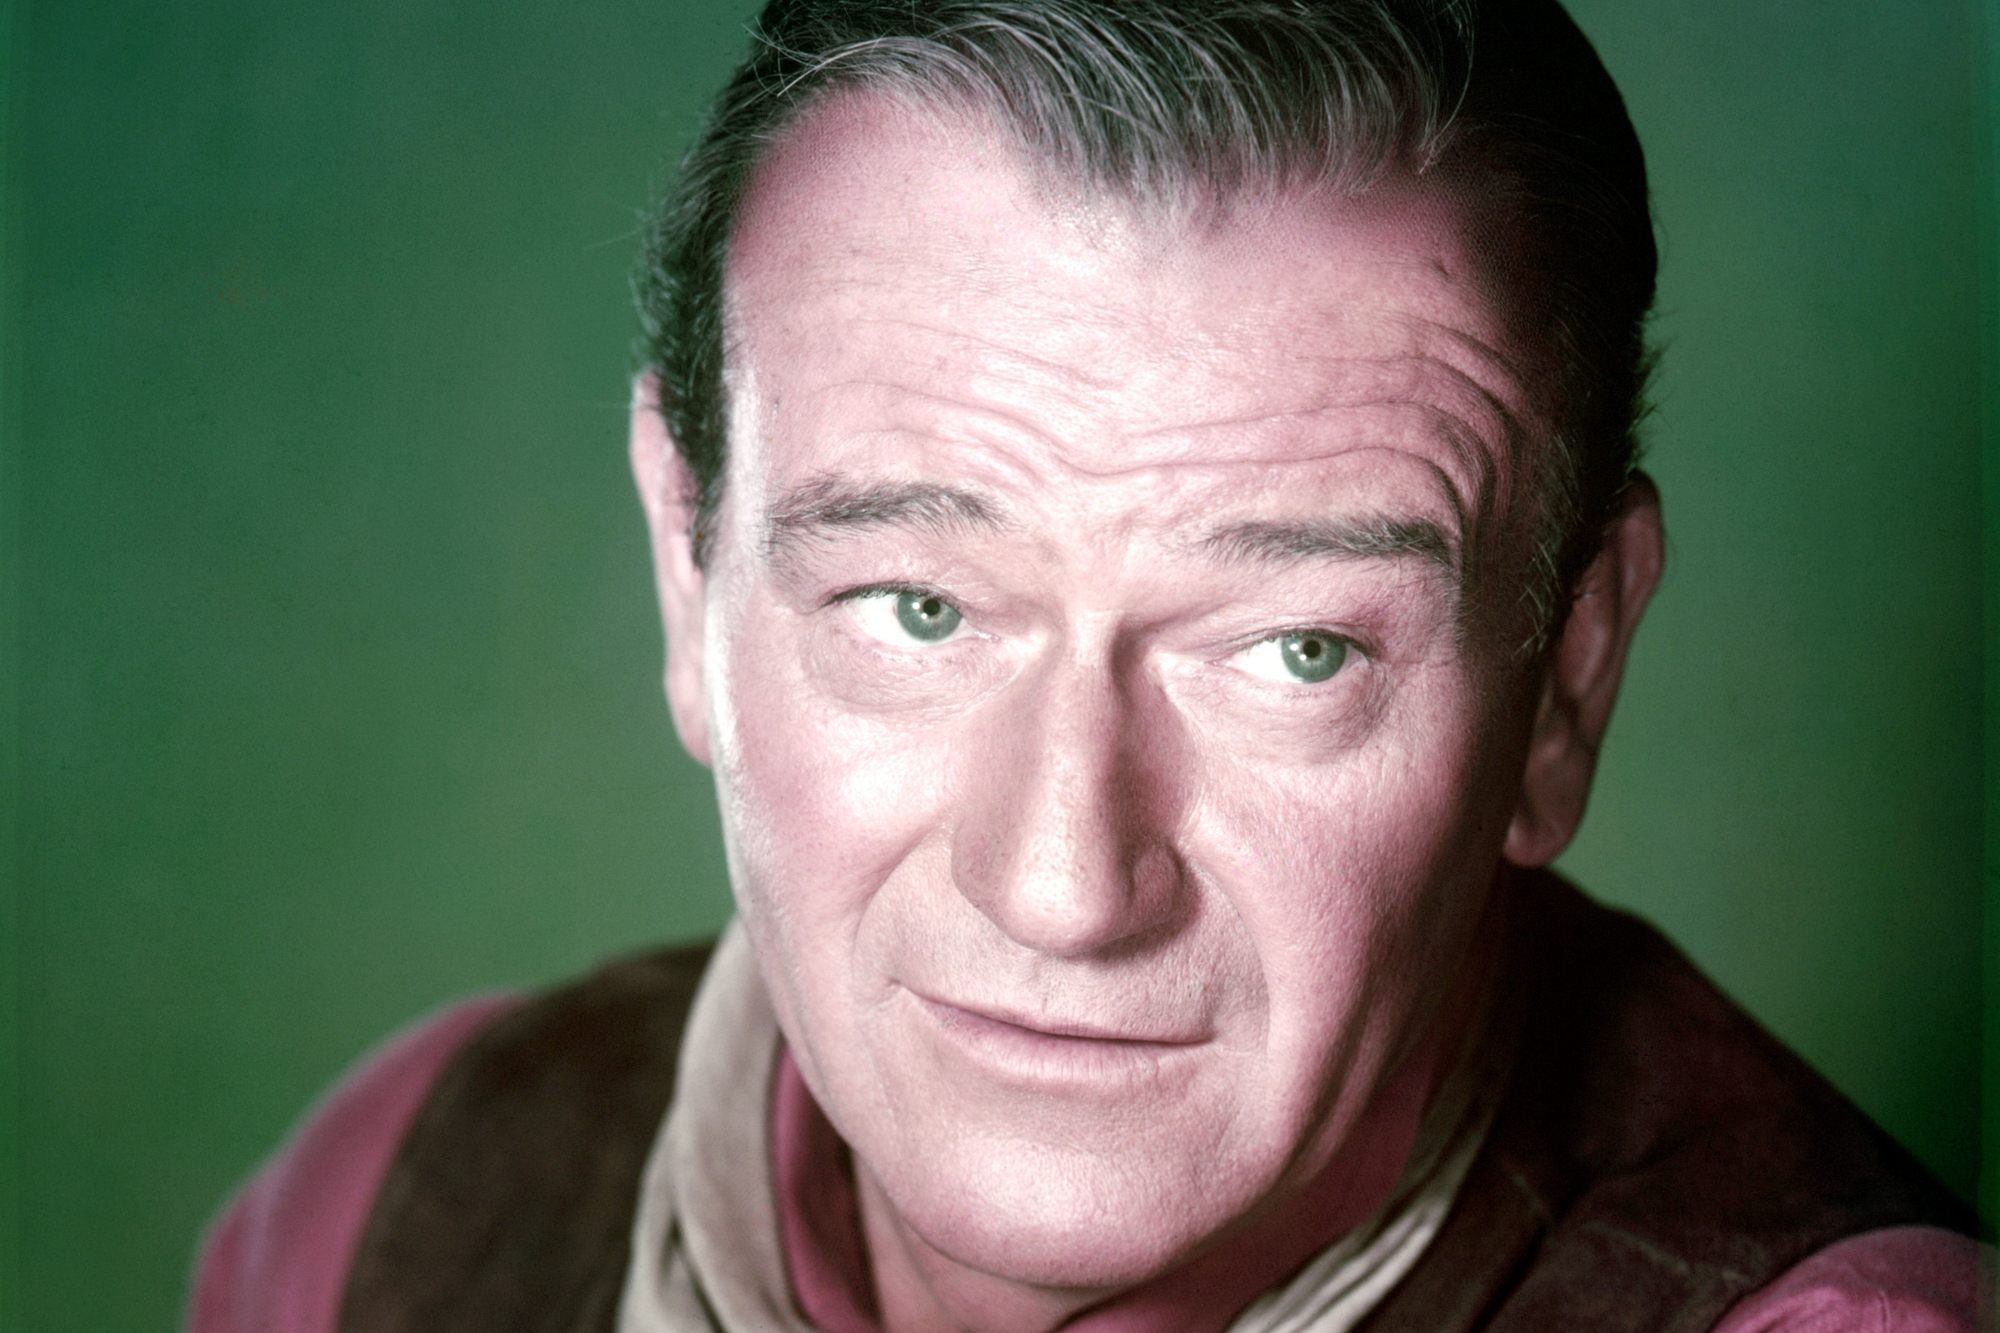 Previous USC football player and movie star John Wayne wearing a Western costume looking to the side in front of a green background